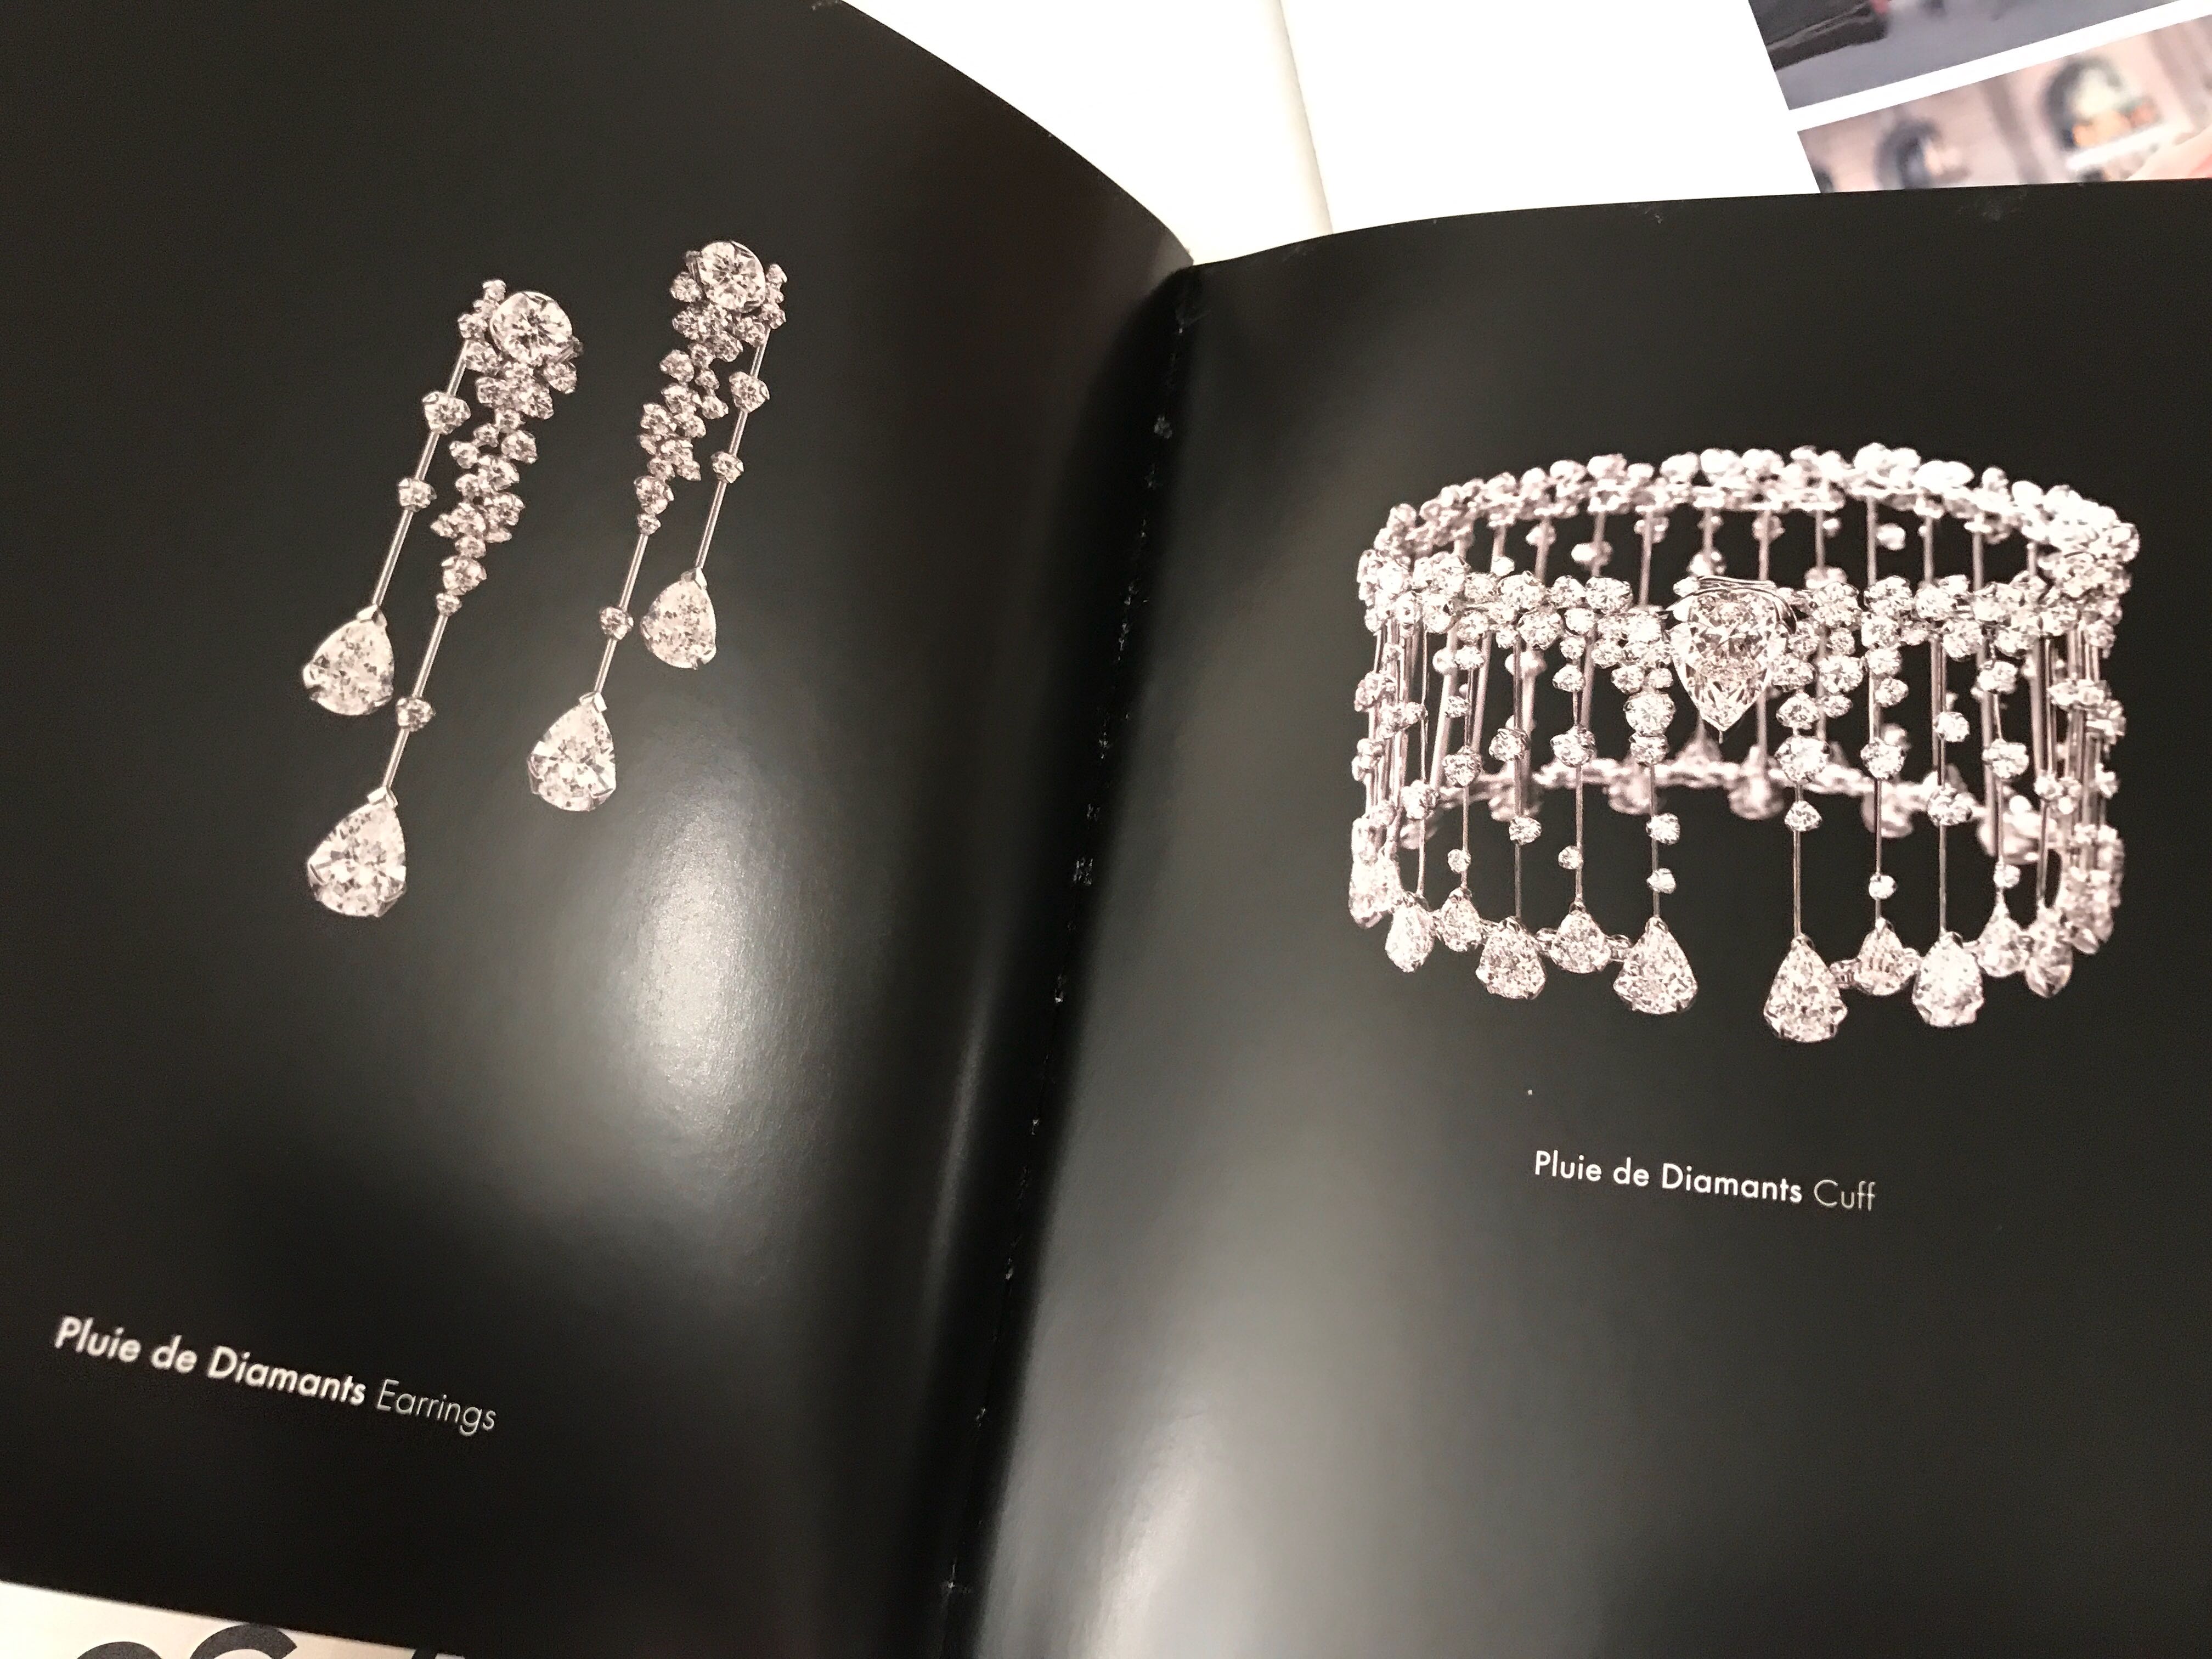 A set of 3 chanel catalogue books on watches and fine jewelry